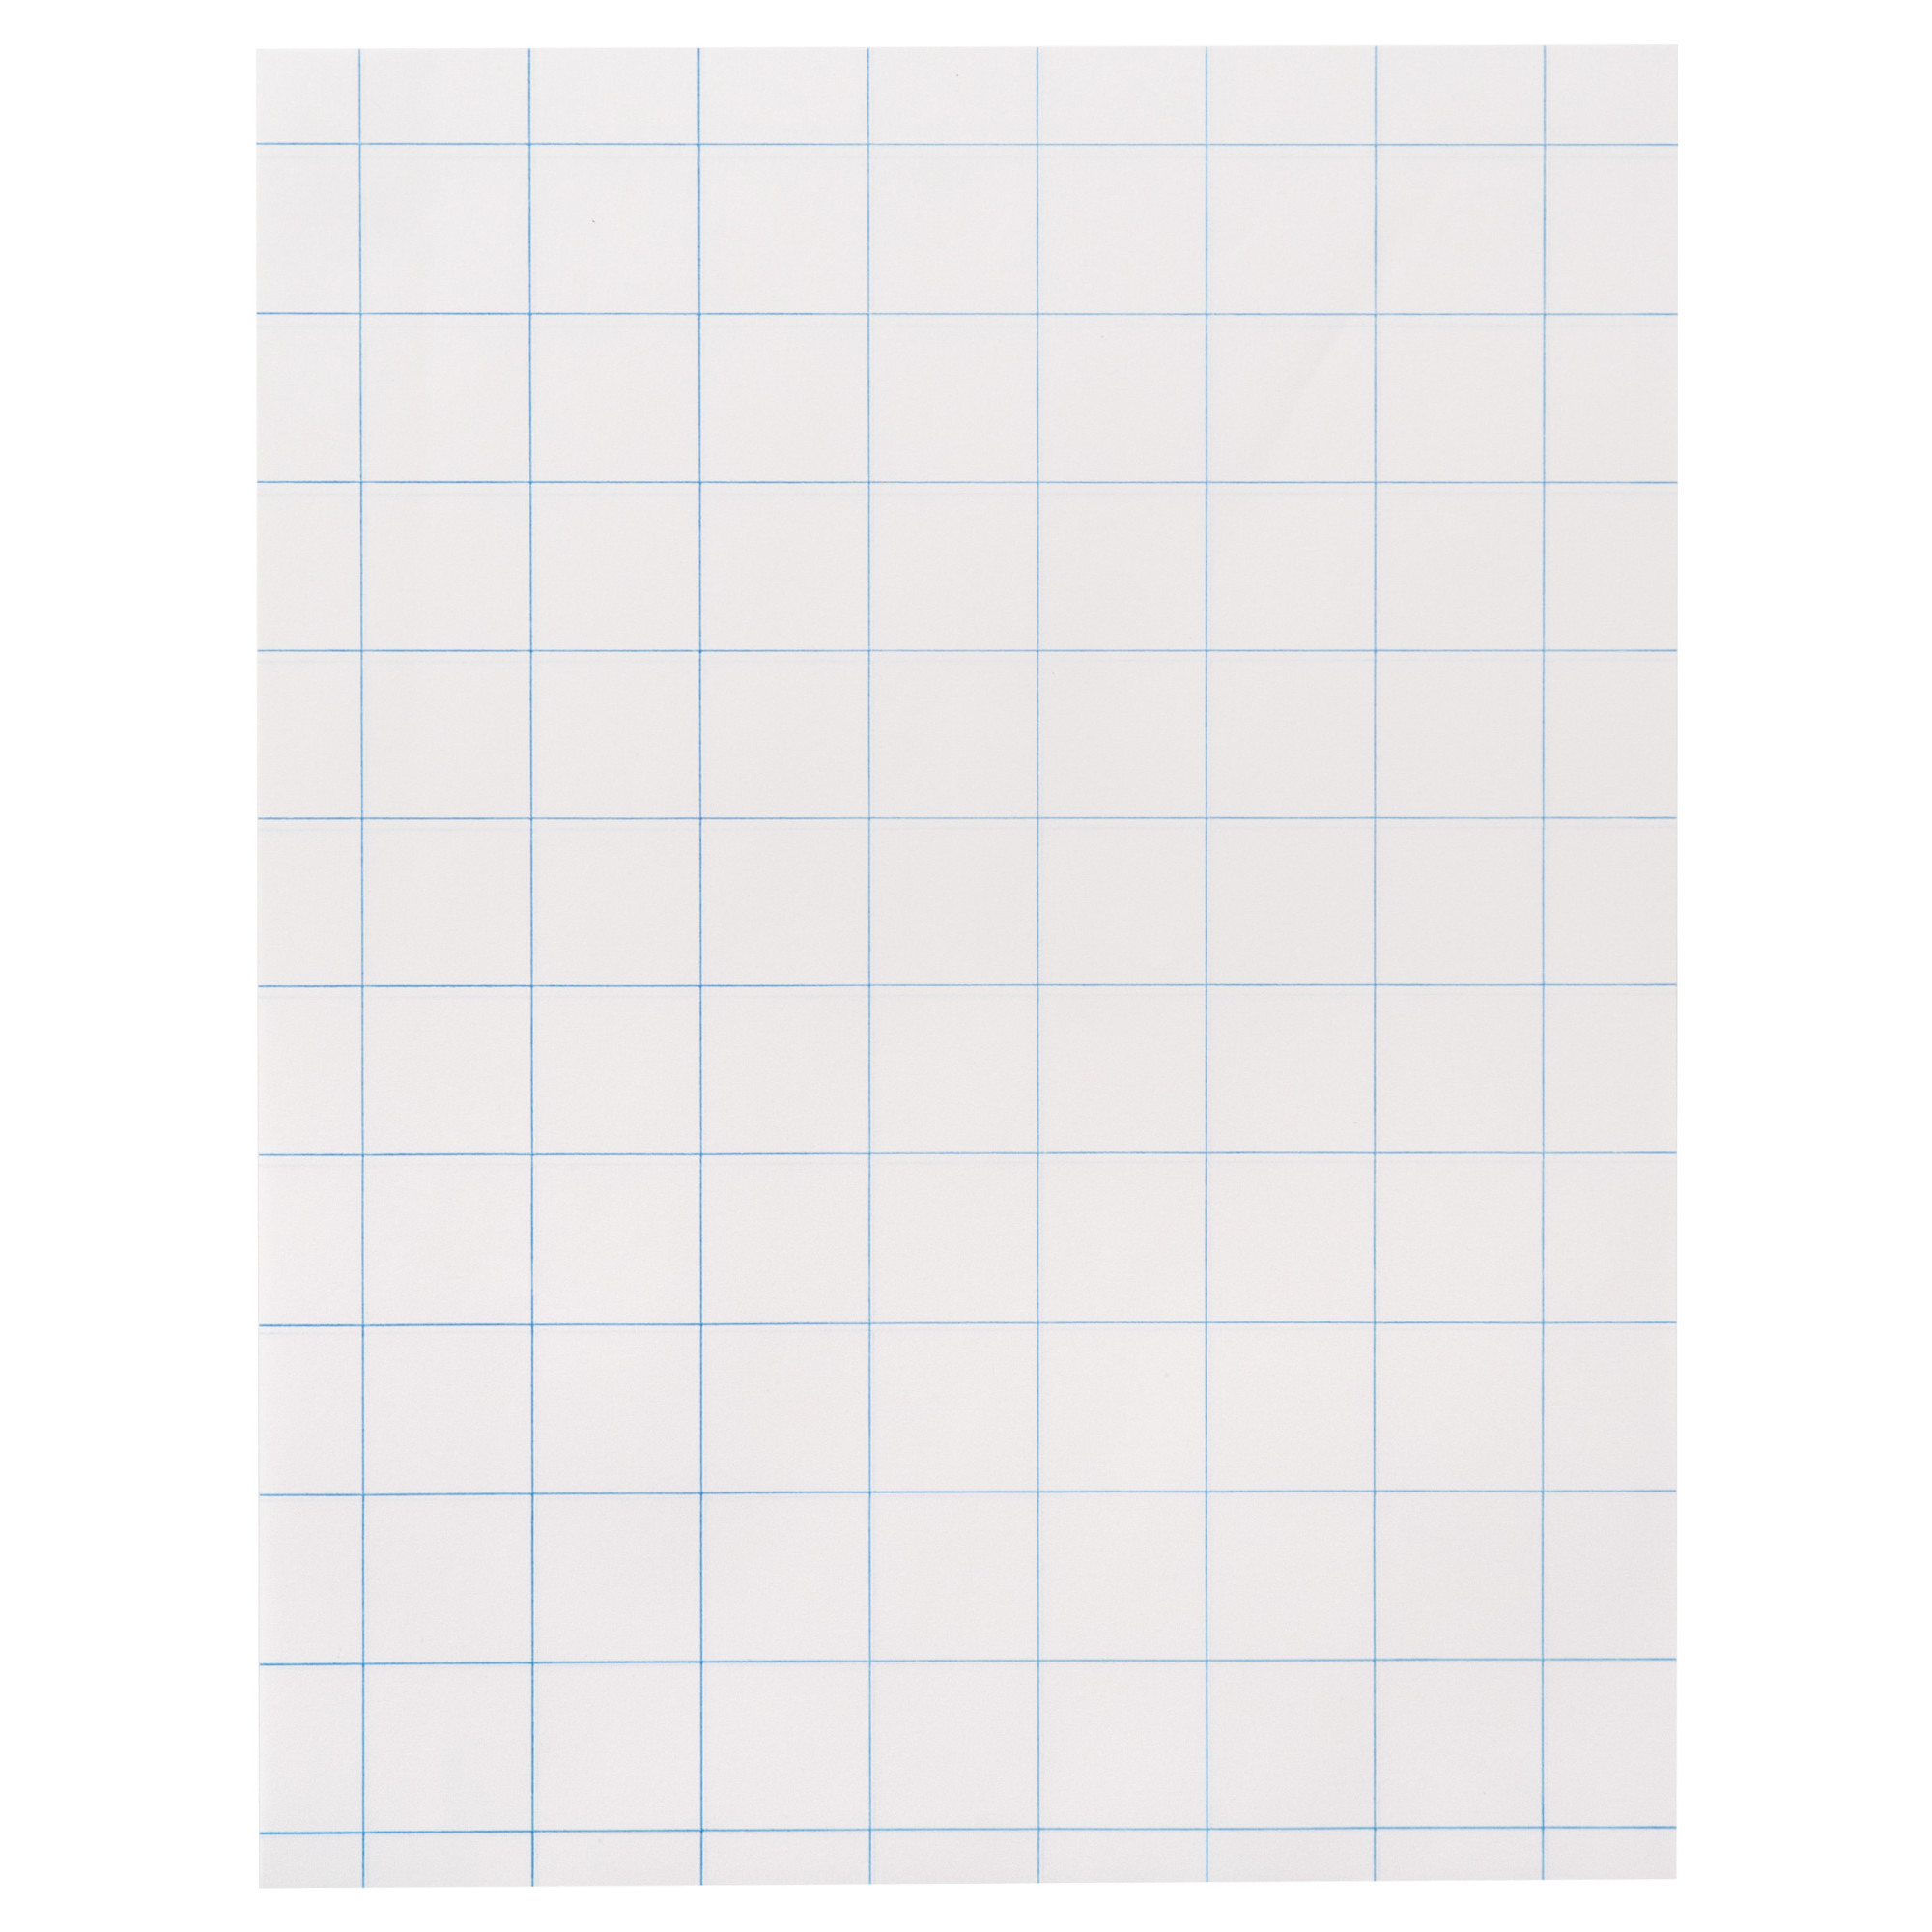 School Smart Graph Paper, 8-1/2 x 11 Inches, 15 lbs, 1 Inch Grids, 500  Sheets